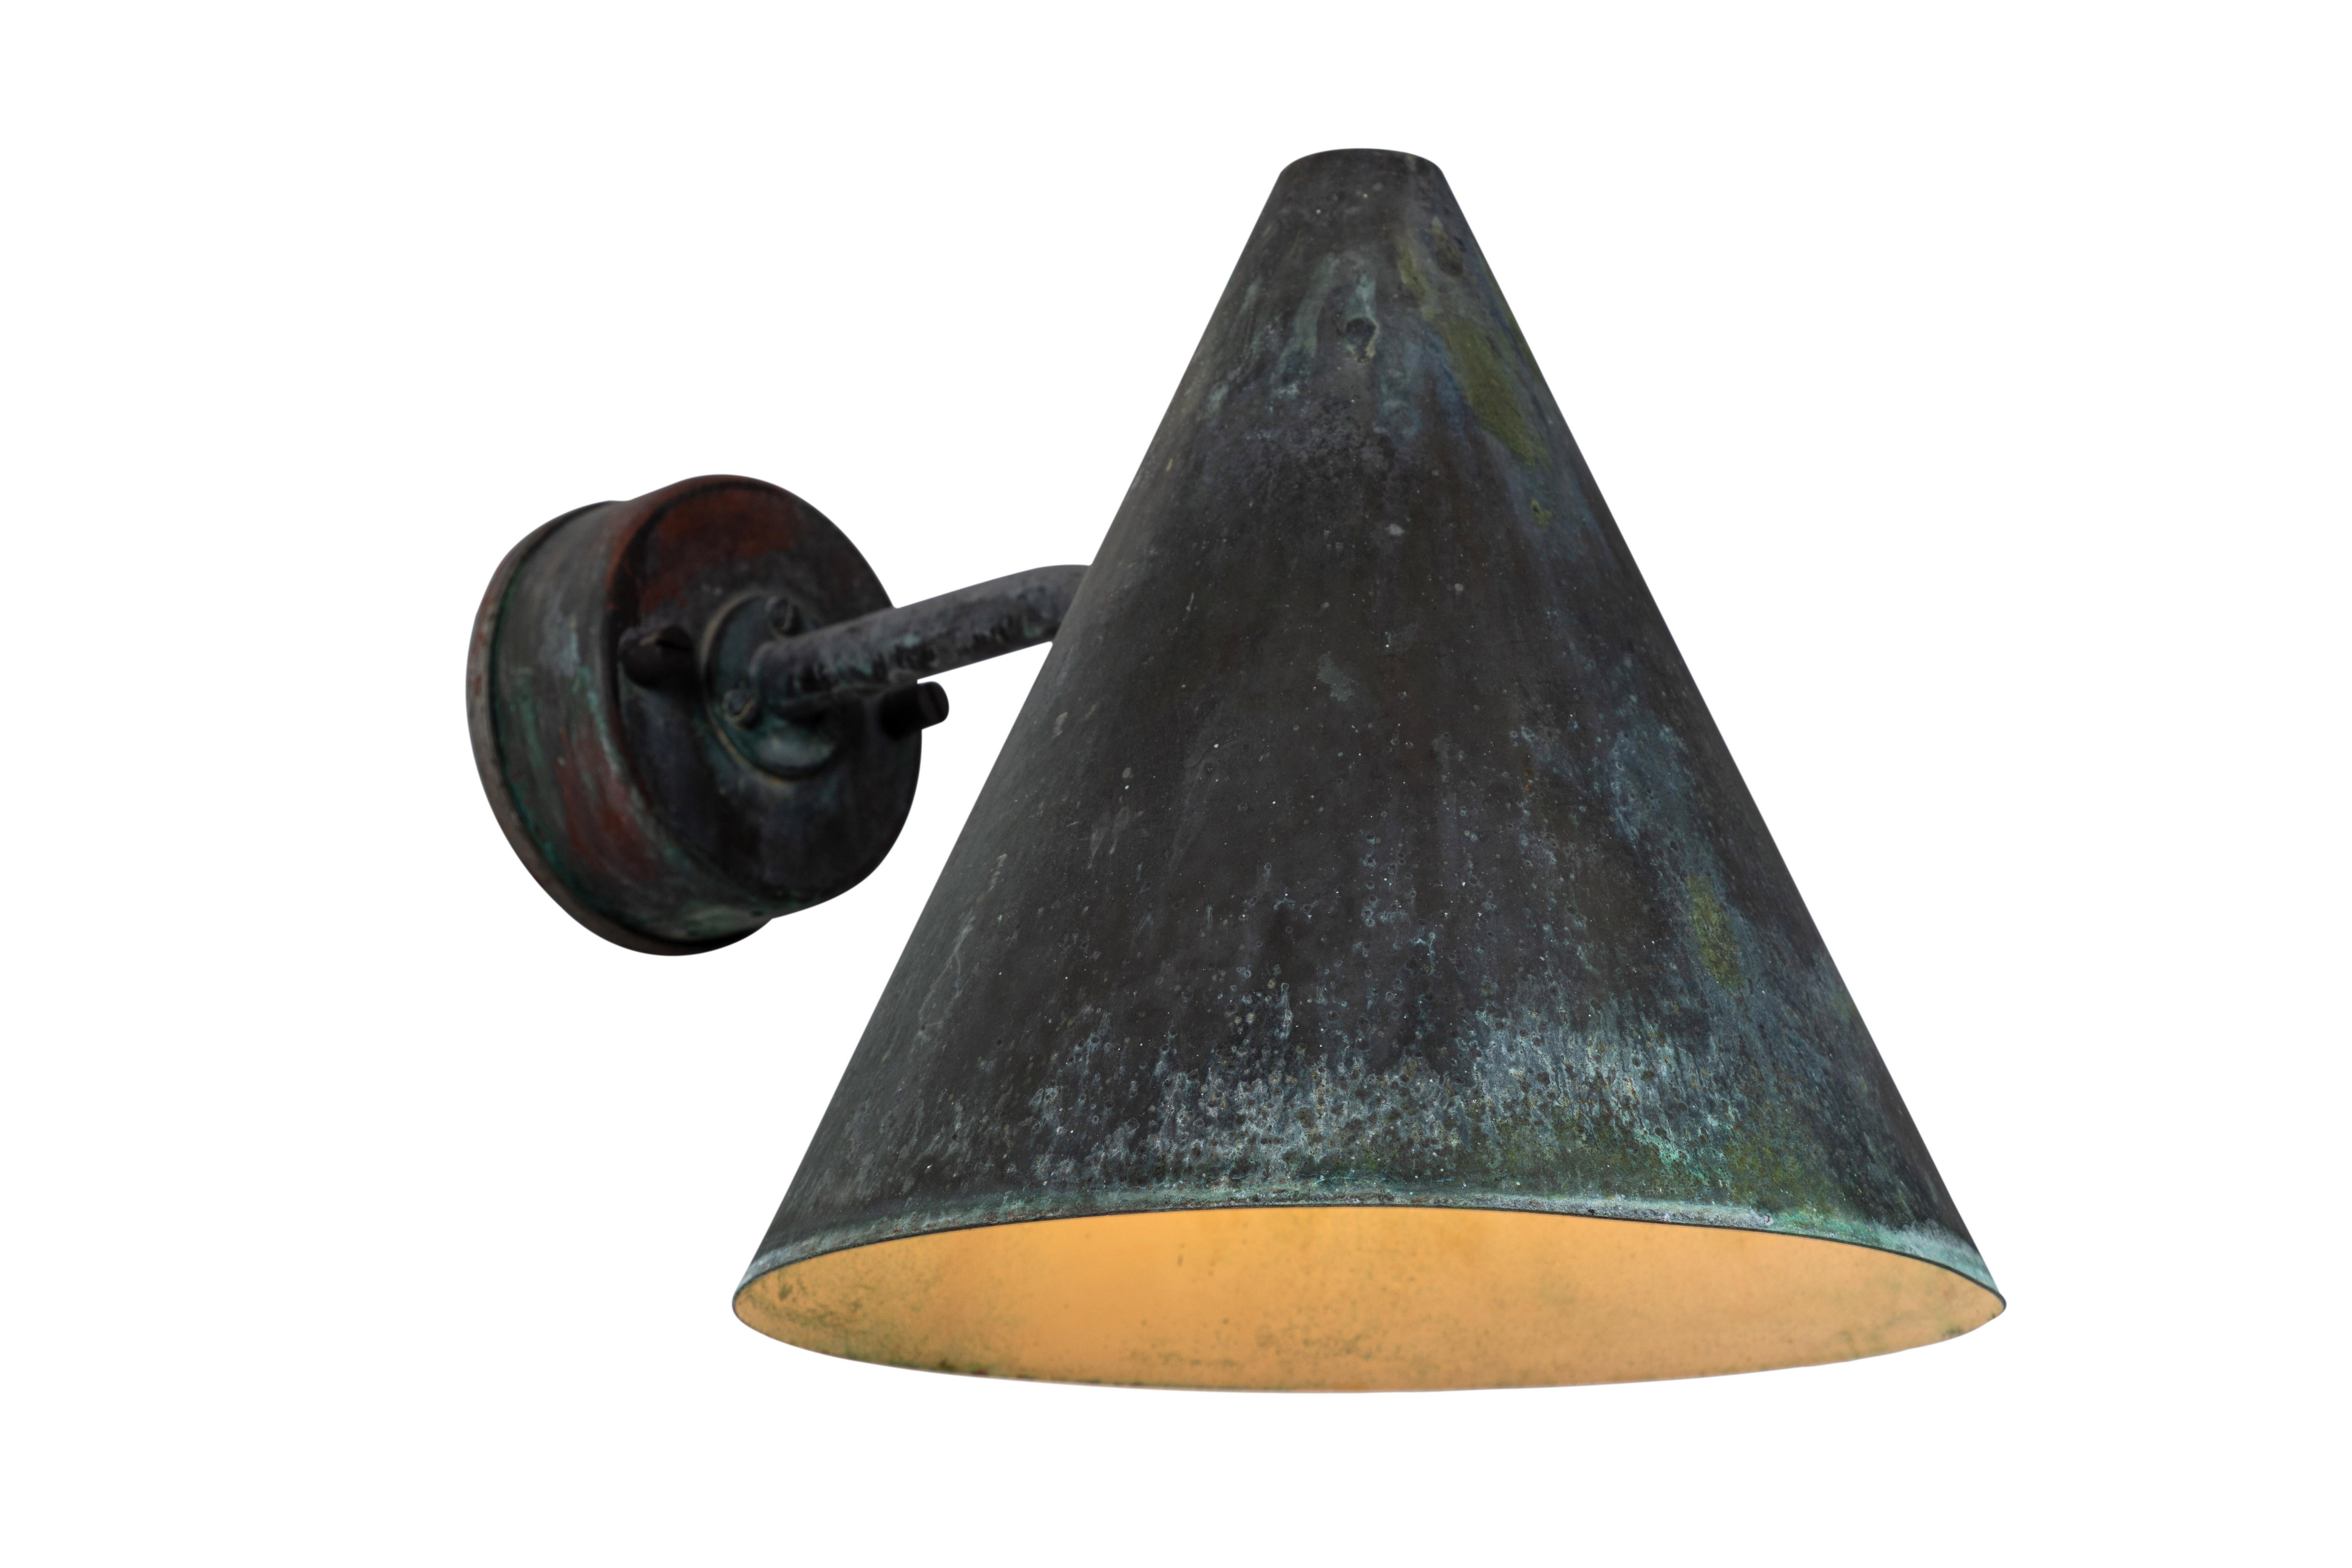 1950s Hans-Agne Jakobsson 'Tratten' outdoor sconces. Produced by AB in Markaryd, Sweden and executed in richly weathered patinated copper. An incredibly refined design that is quintessentially Scandinavian.

Price is per pair. 3 pairs in-stock. Out